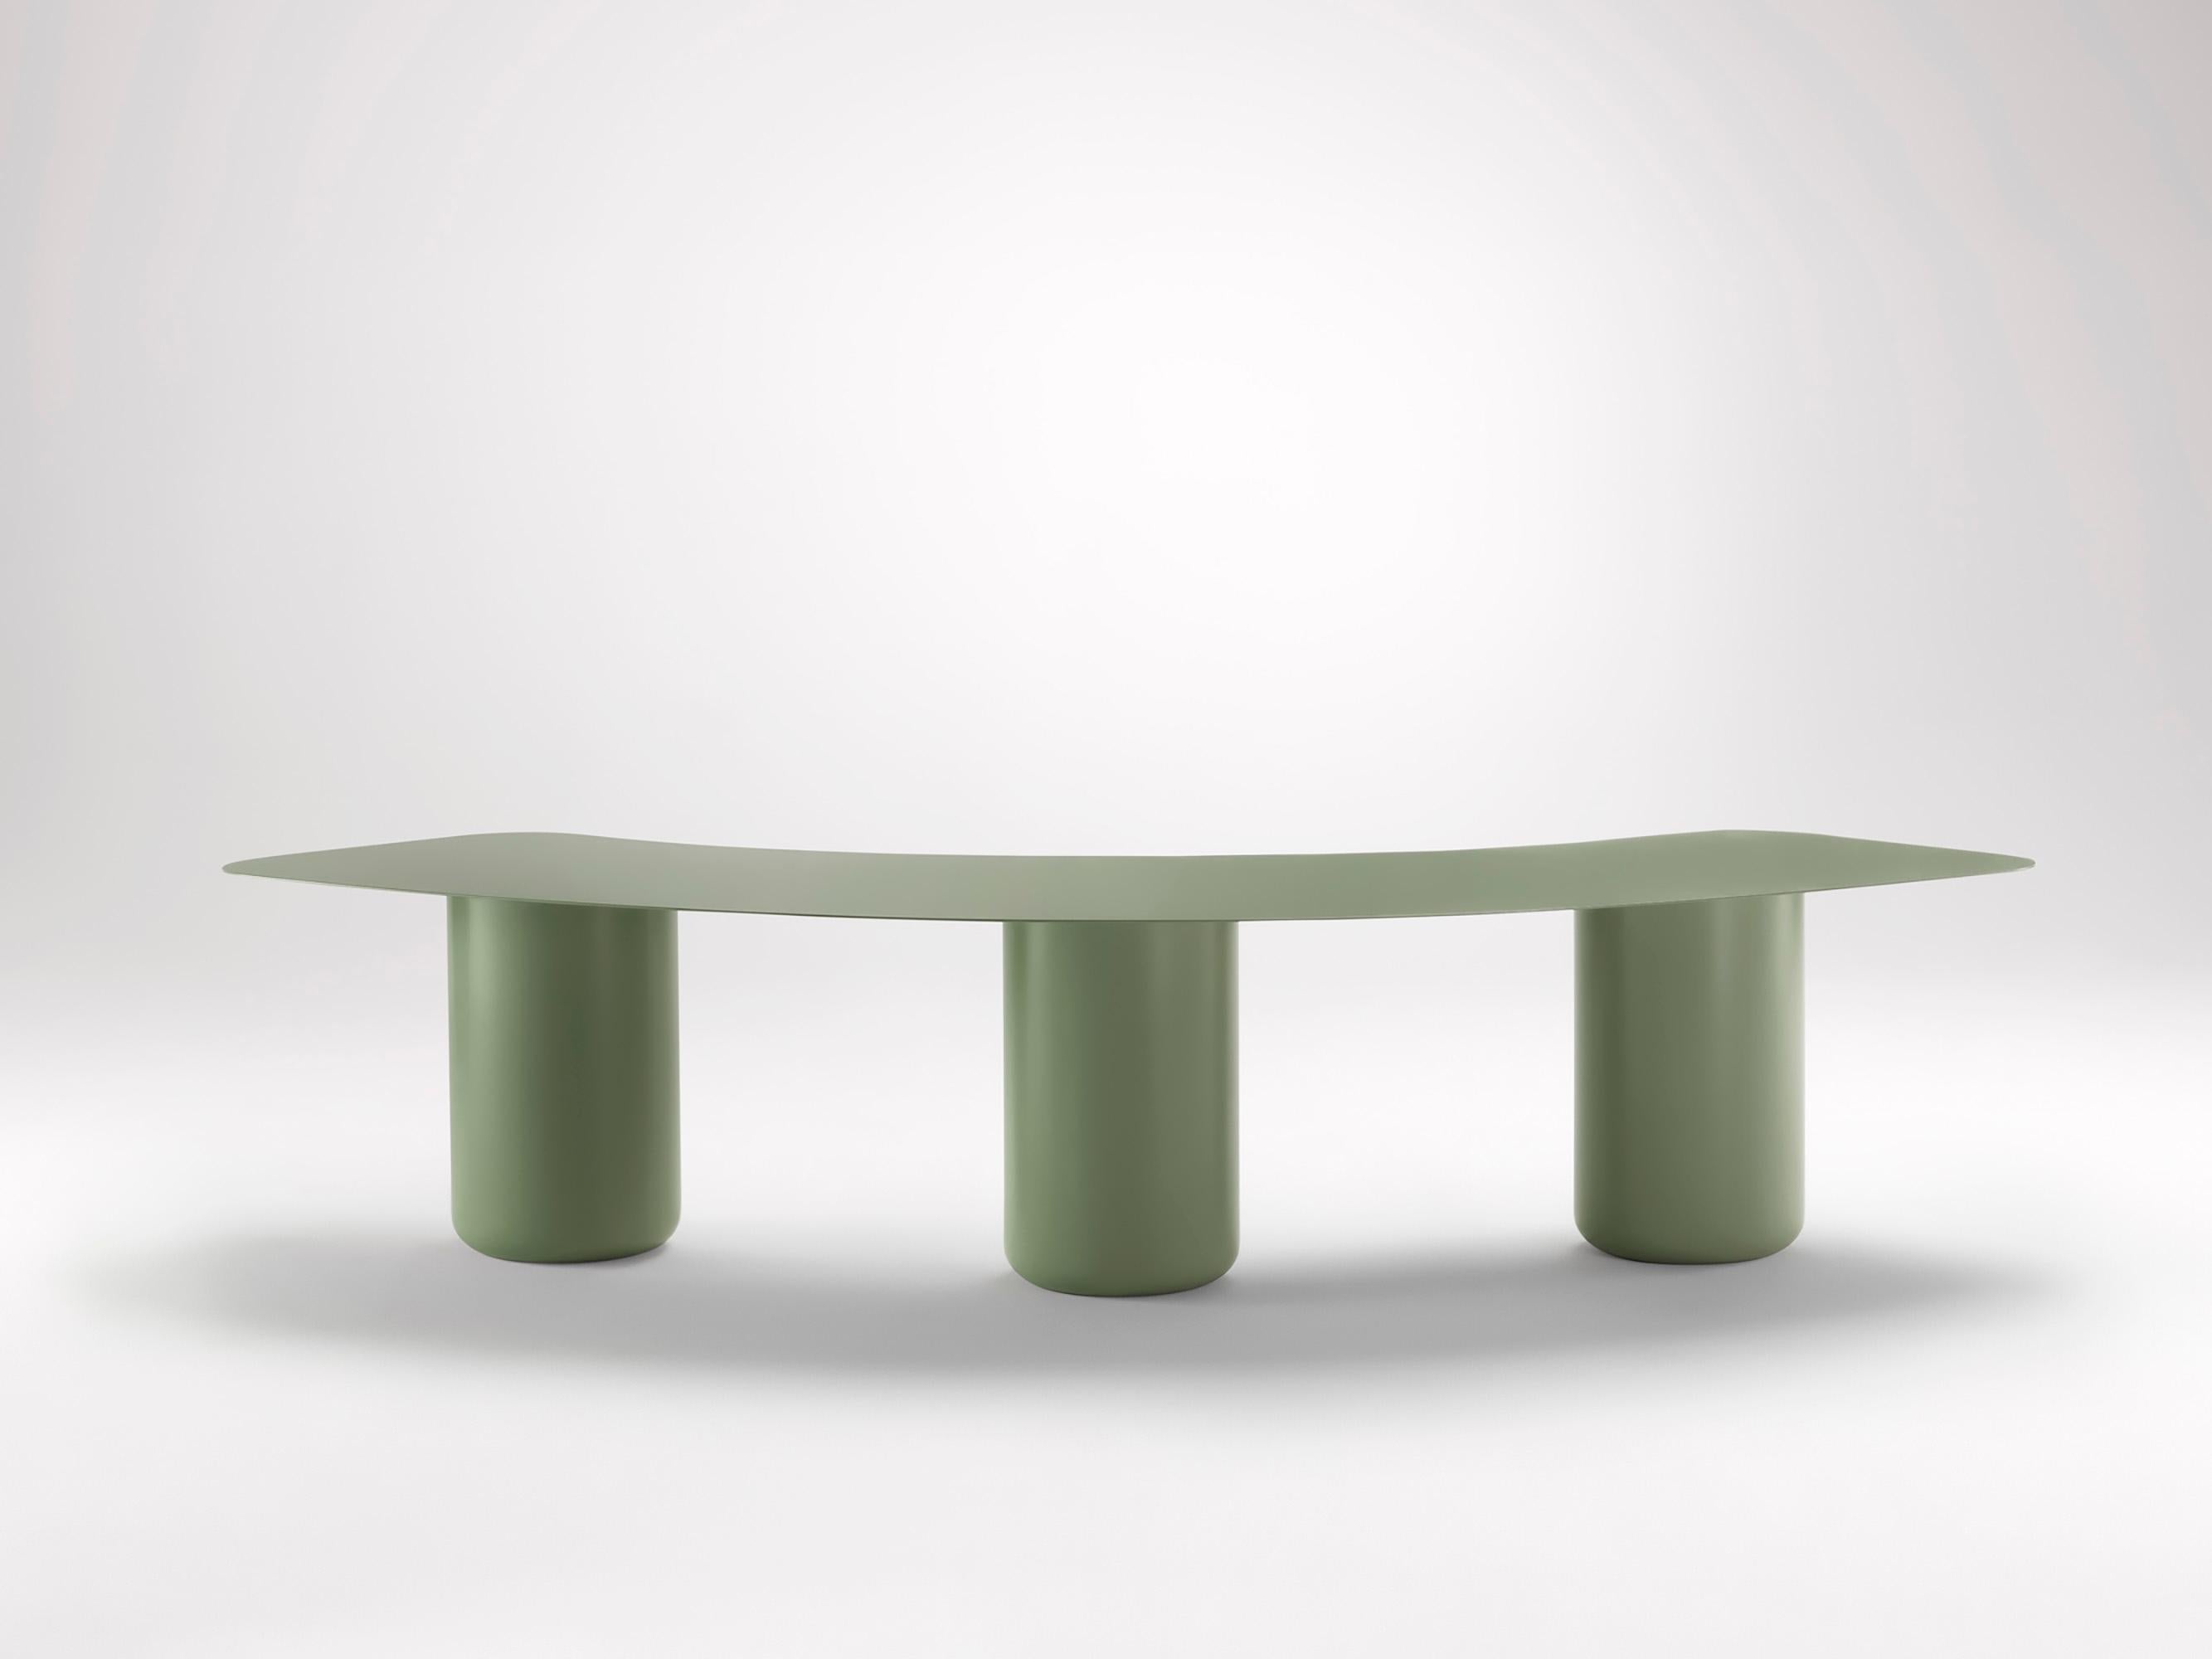 Small Pale Eucalypt Curved Bench by Coco Flip
Dimensions: D 65 x W 165 x H 42 cm
Materials: Mild steel, powder-coated with zinc undercoat. 
Weight: 42 kg

Coco Flip is a Melbourne based furniture and lighting design studio, run by us, Kate Stokes